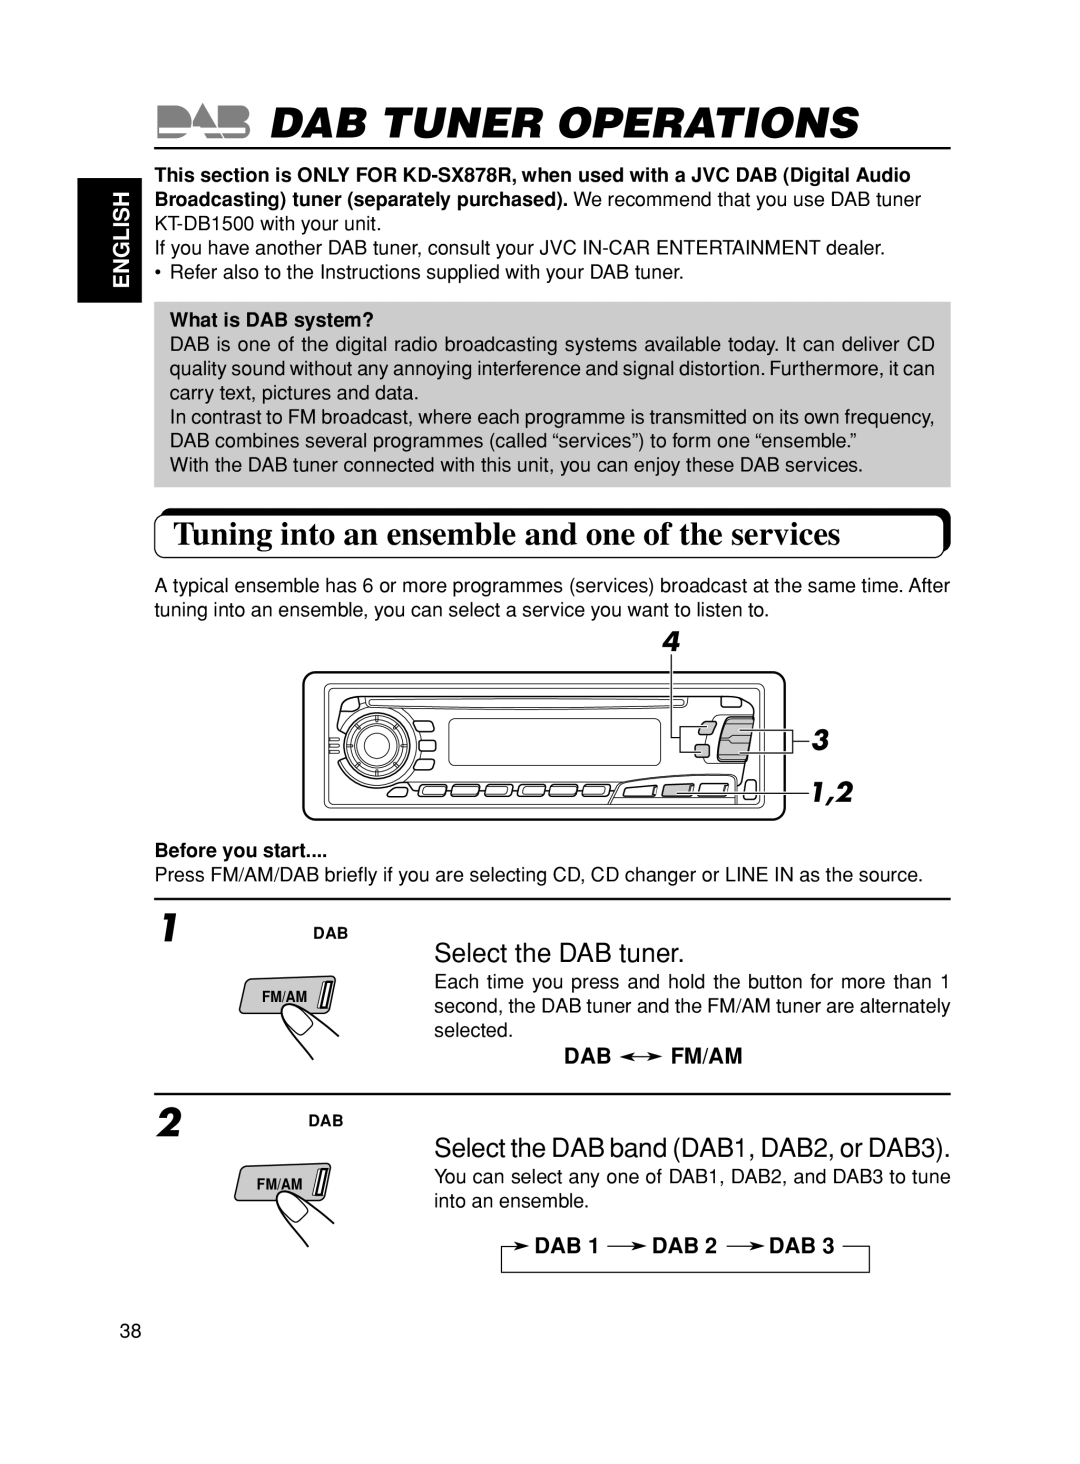 JVC KD-S8R manual Dab Tuner Operations, Tuning into an ensemble and one of the services, 3 1,2, English, Dab Fm/Am 